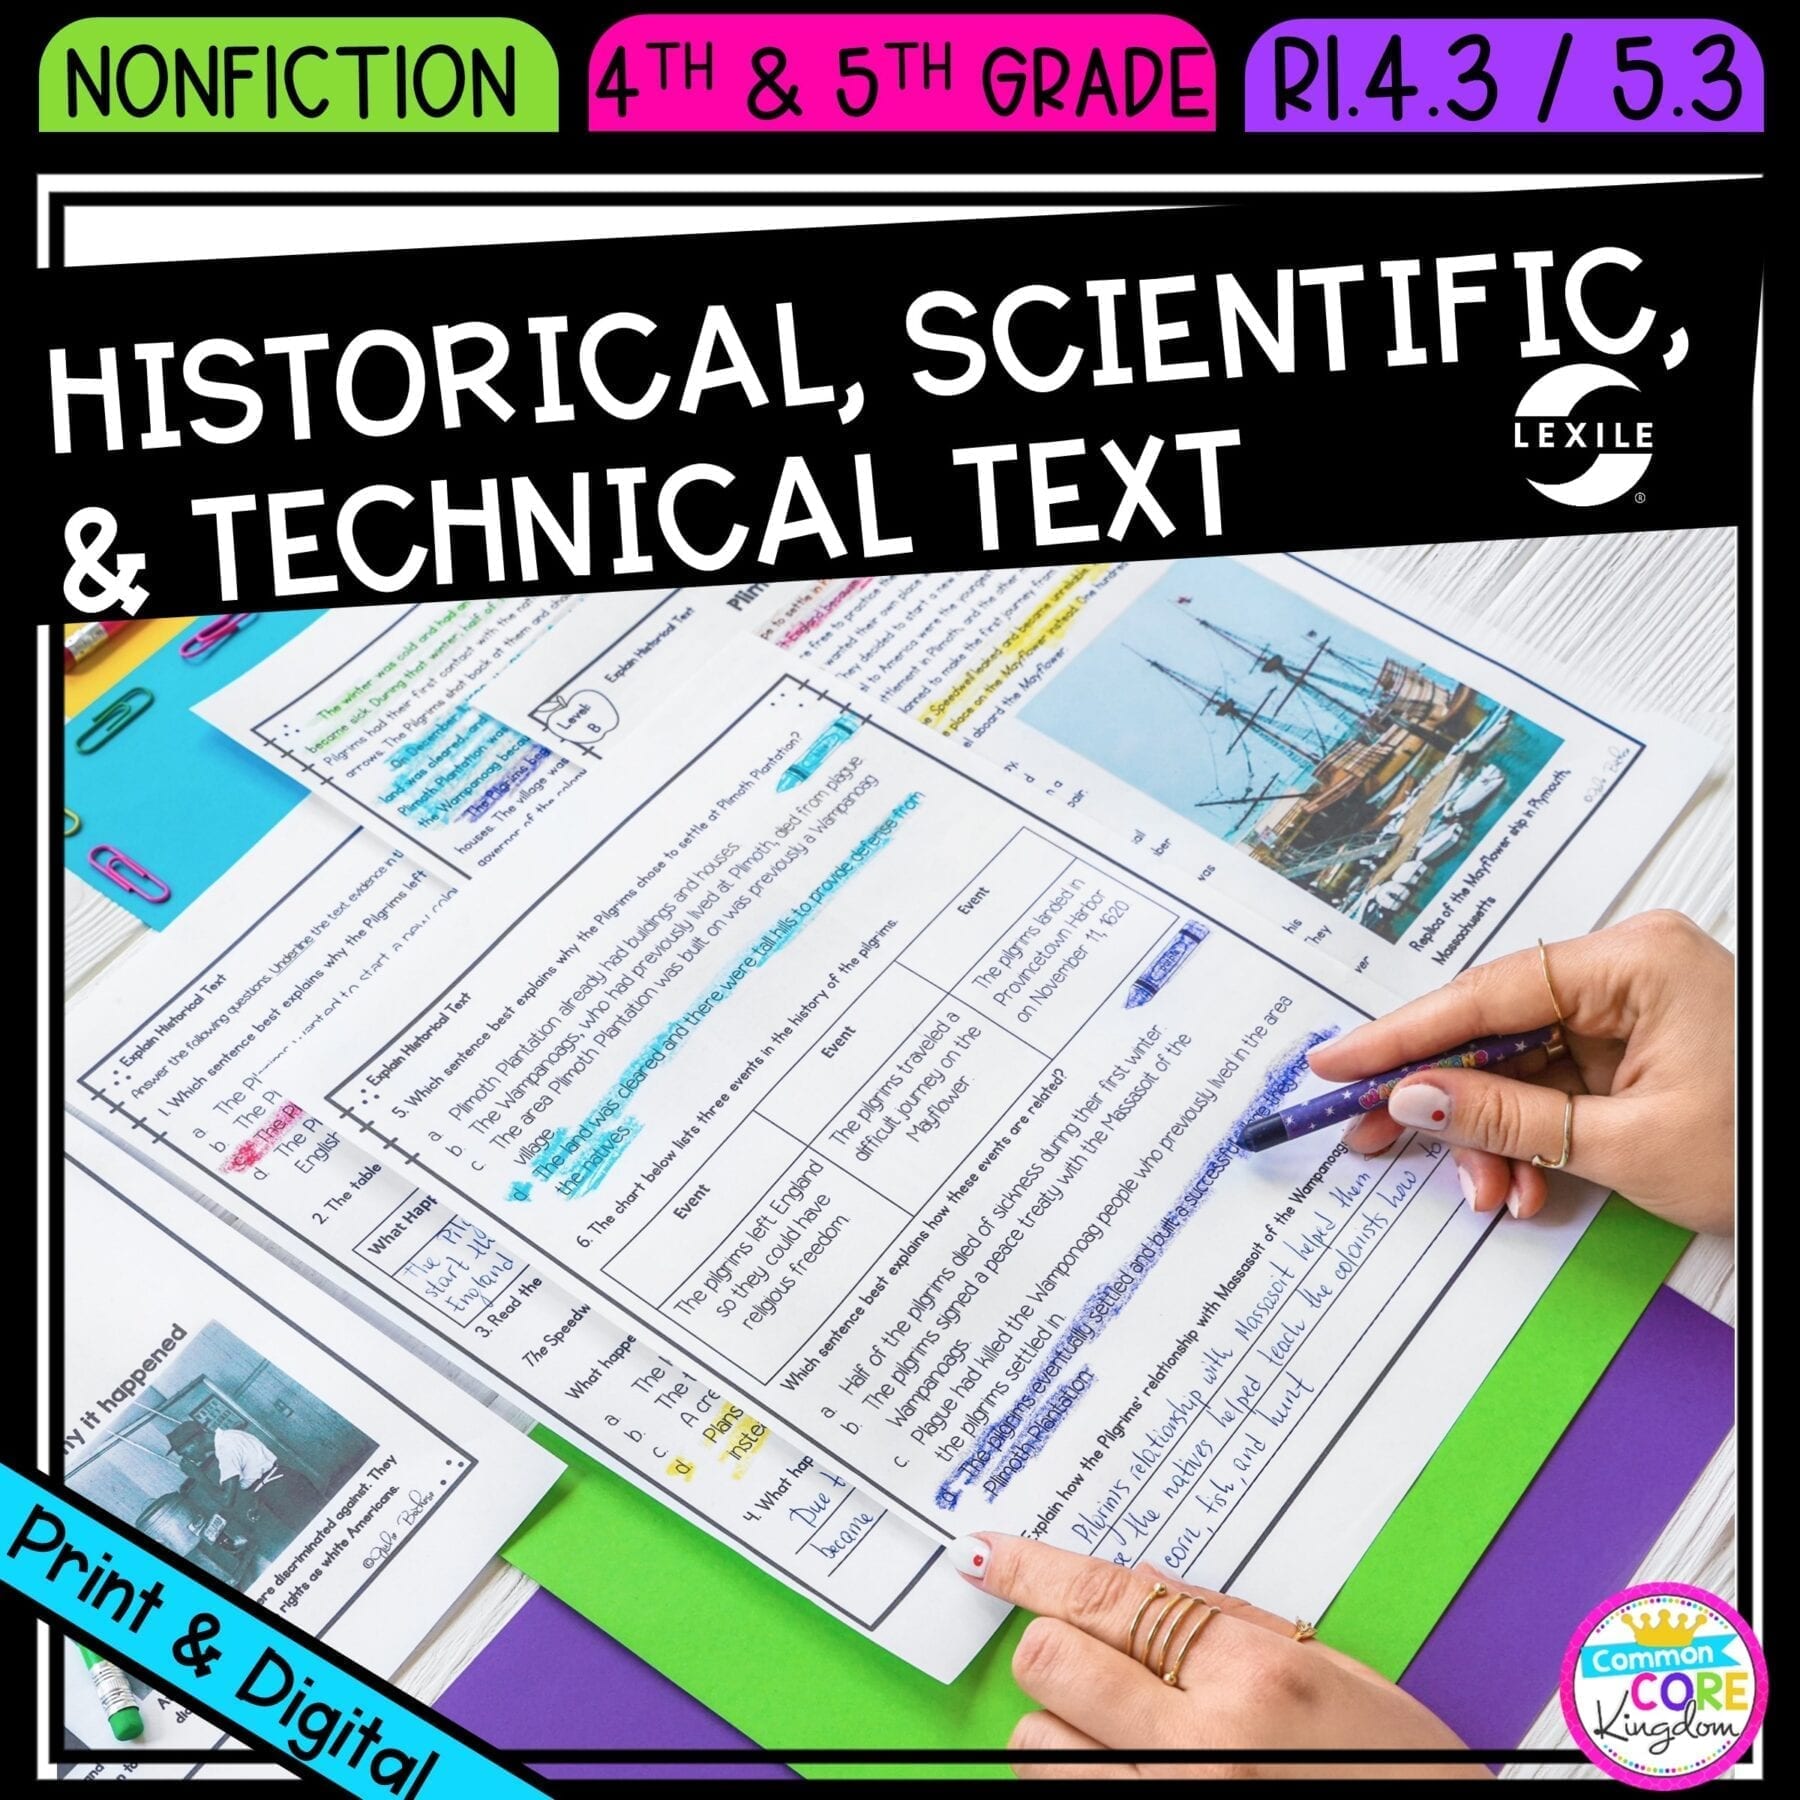 Historical, Scientific and Technical Text for 4th & 5th grade cover showing printable and digital worksheets